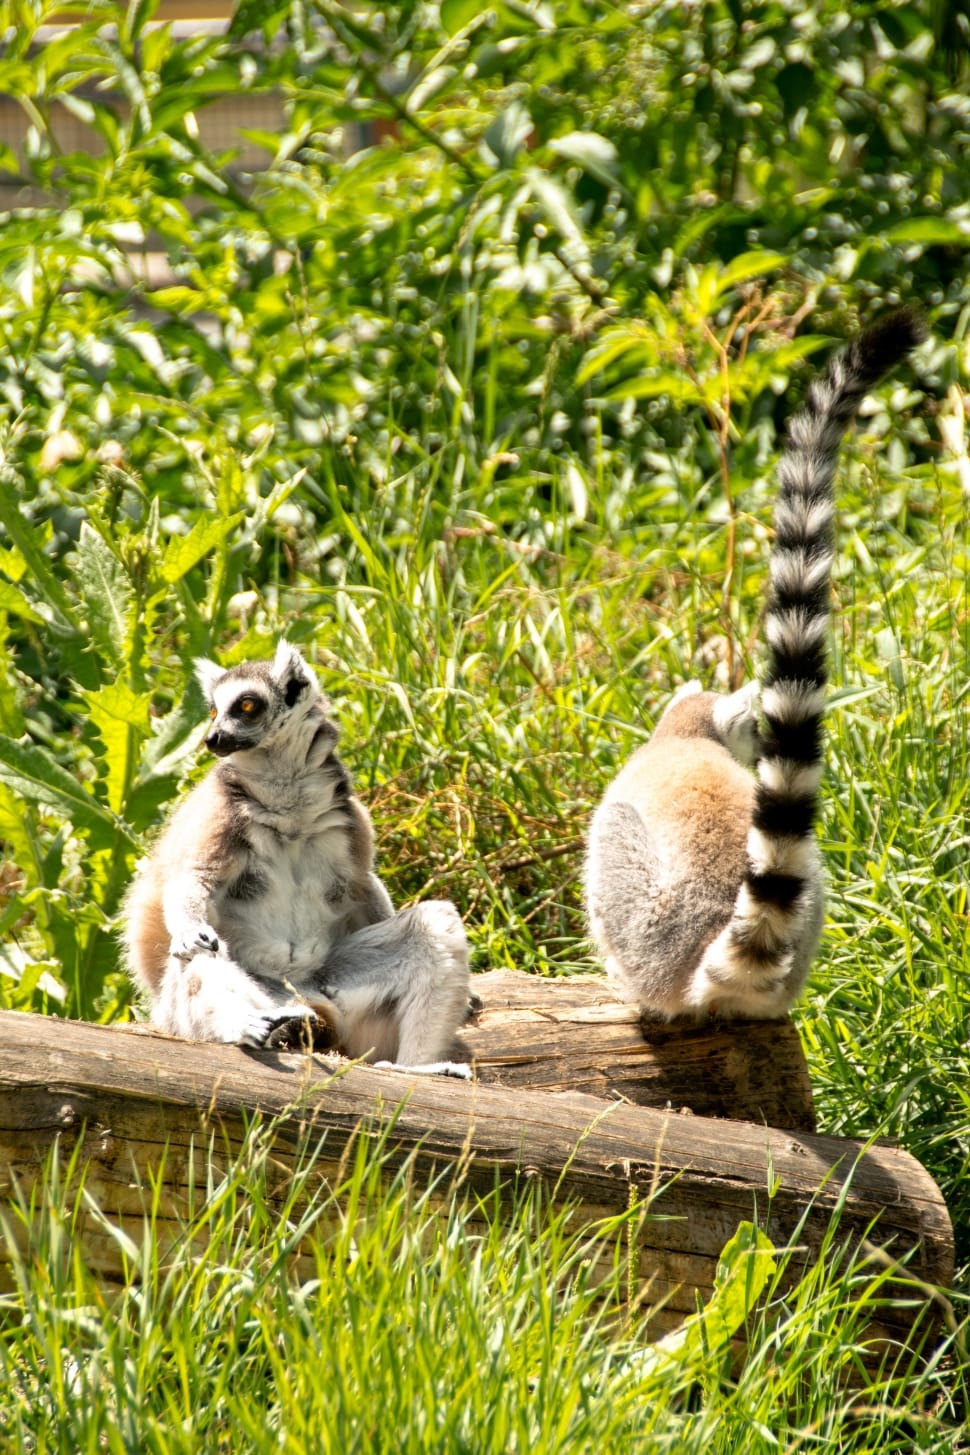 Eye, Lemur Catta, Ring Tailed Lemur, animals in the wild, animal themes preview